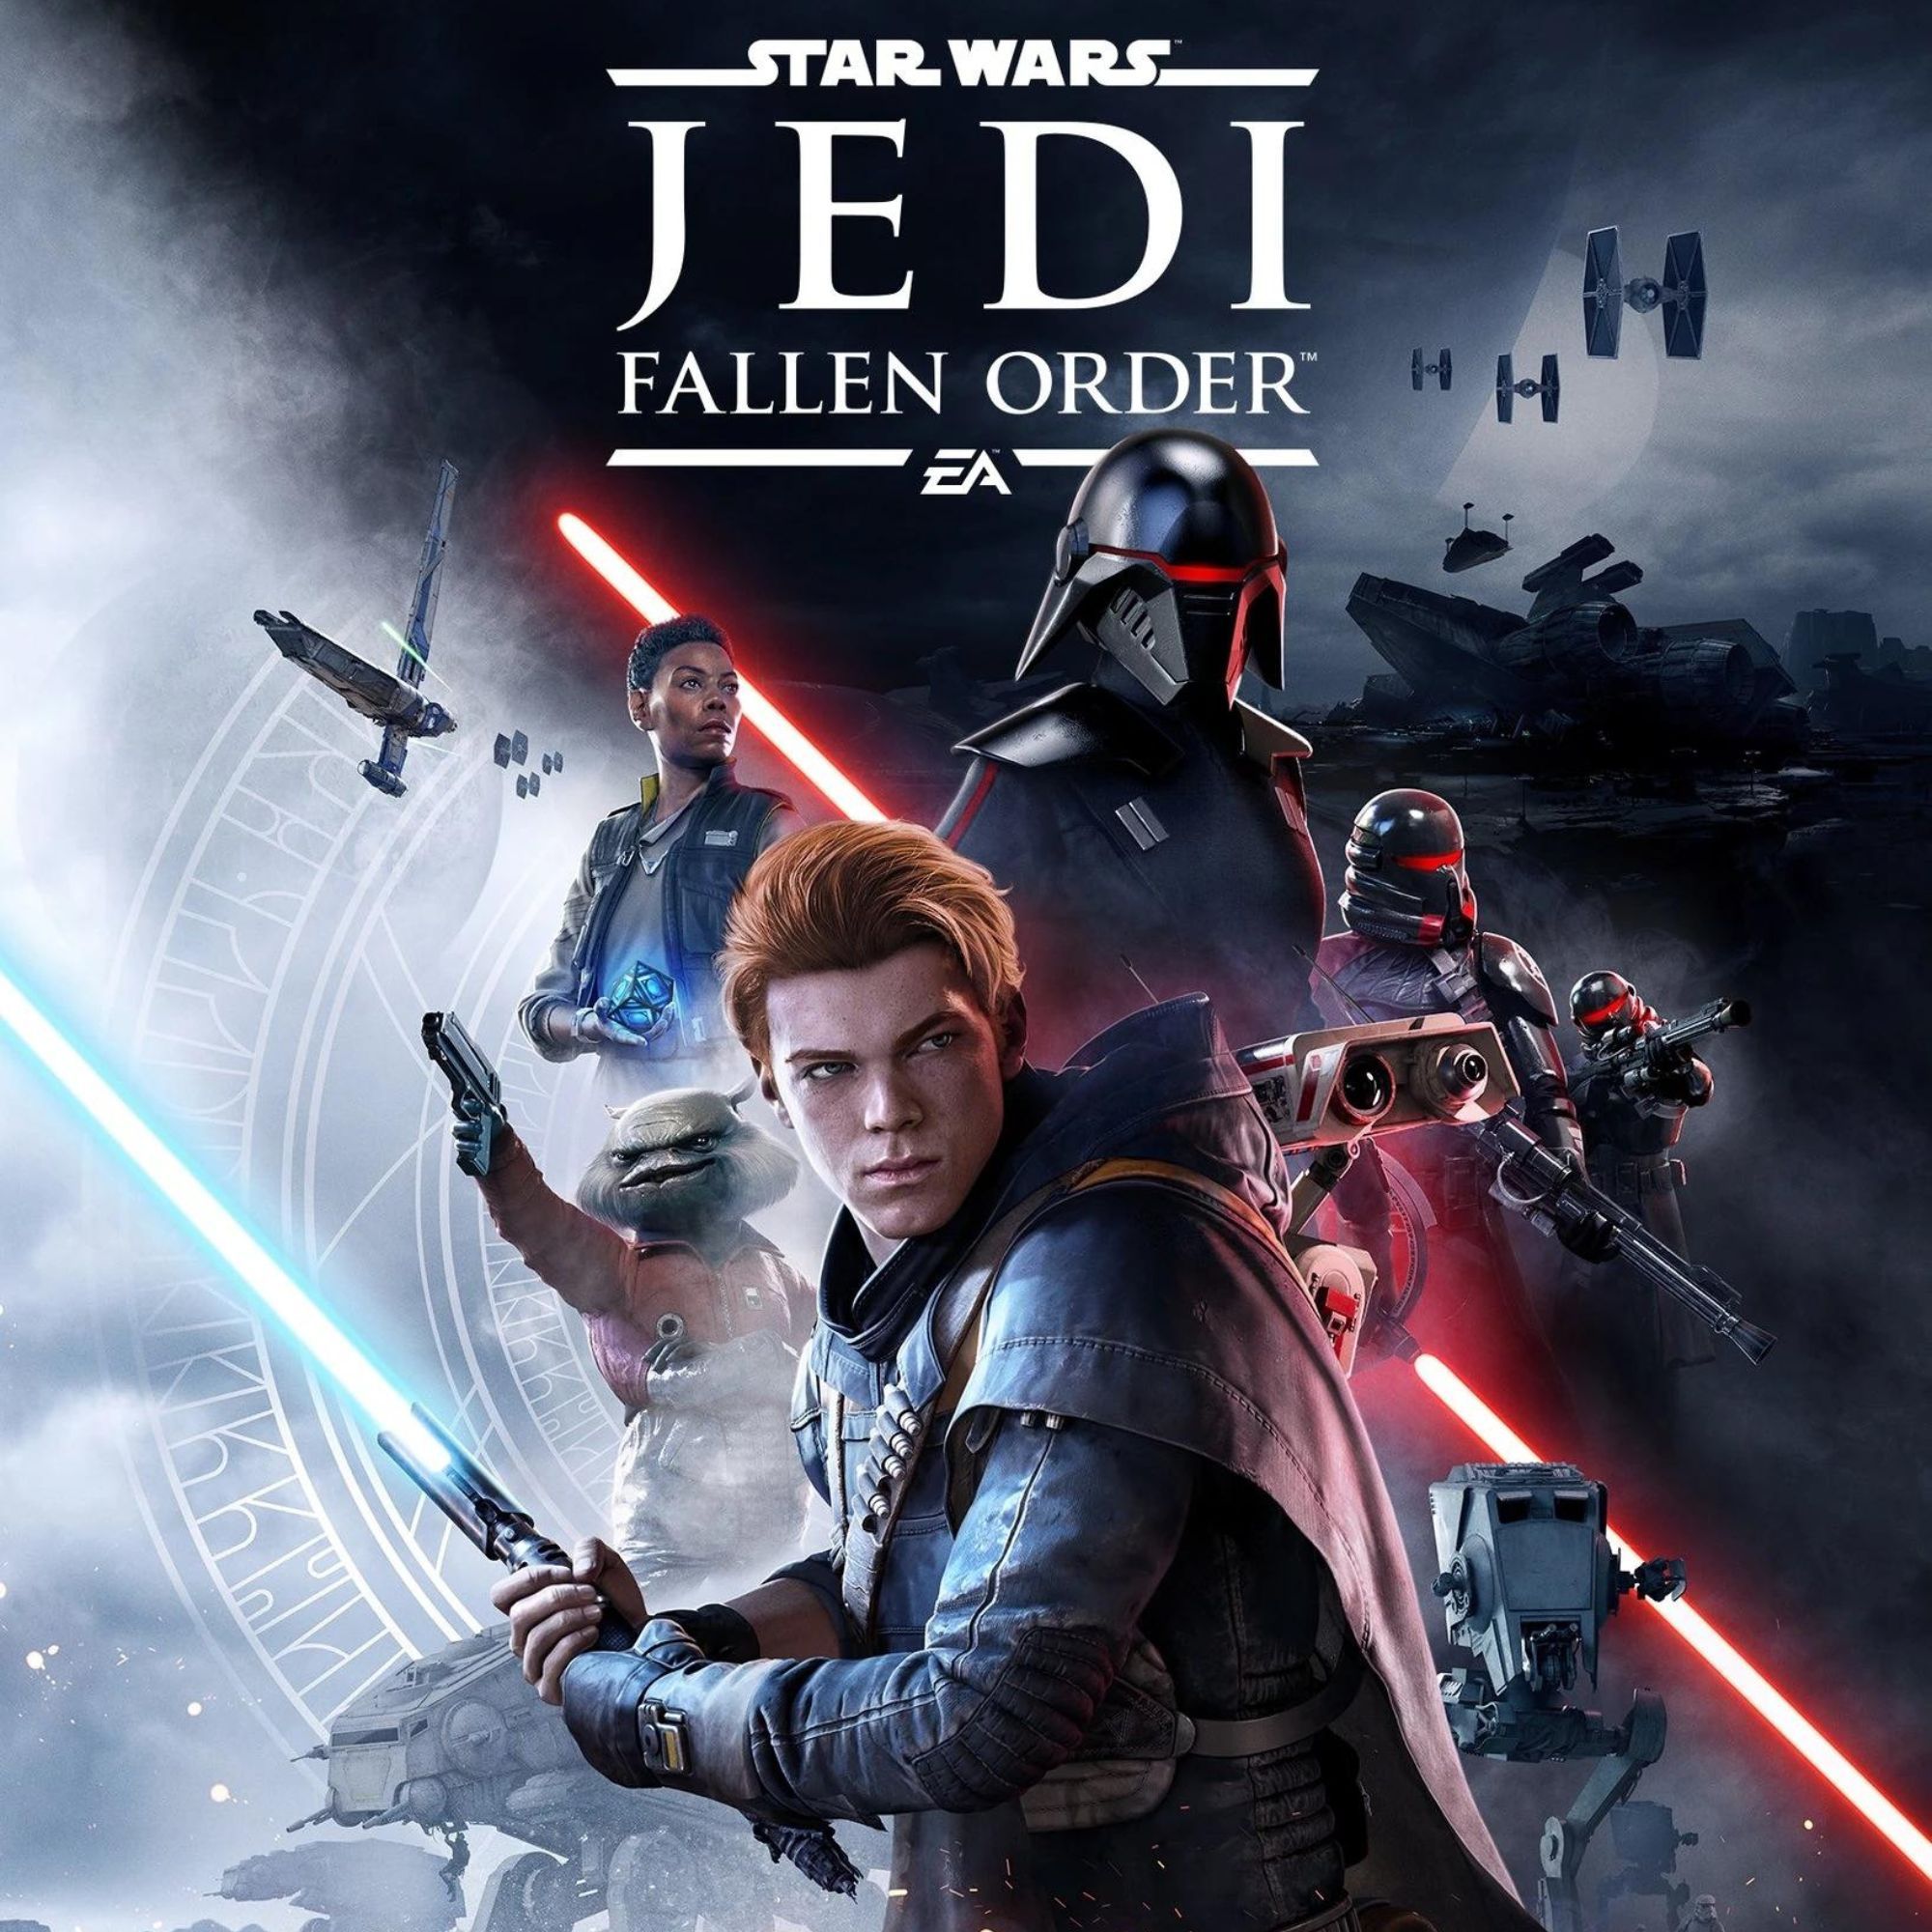 2000x2000 tag image of Star Wars Jedi: Fallen Order. Cal Kestis holds a blue lightsaber against a number of Star Wars characters.